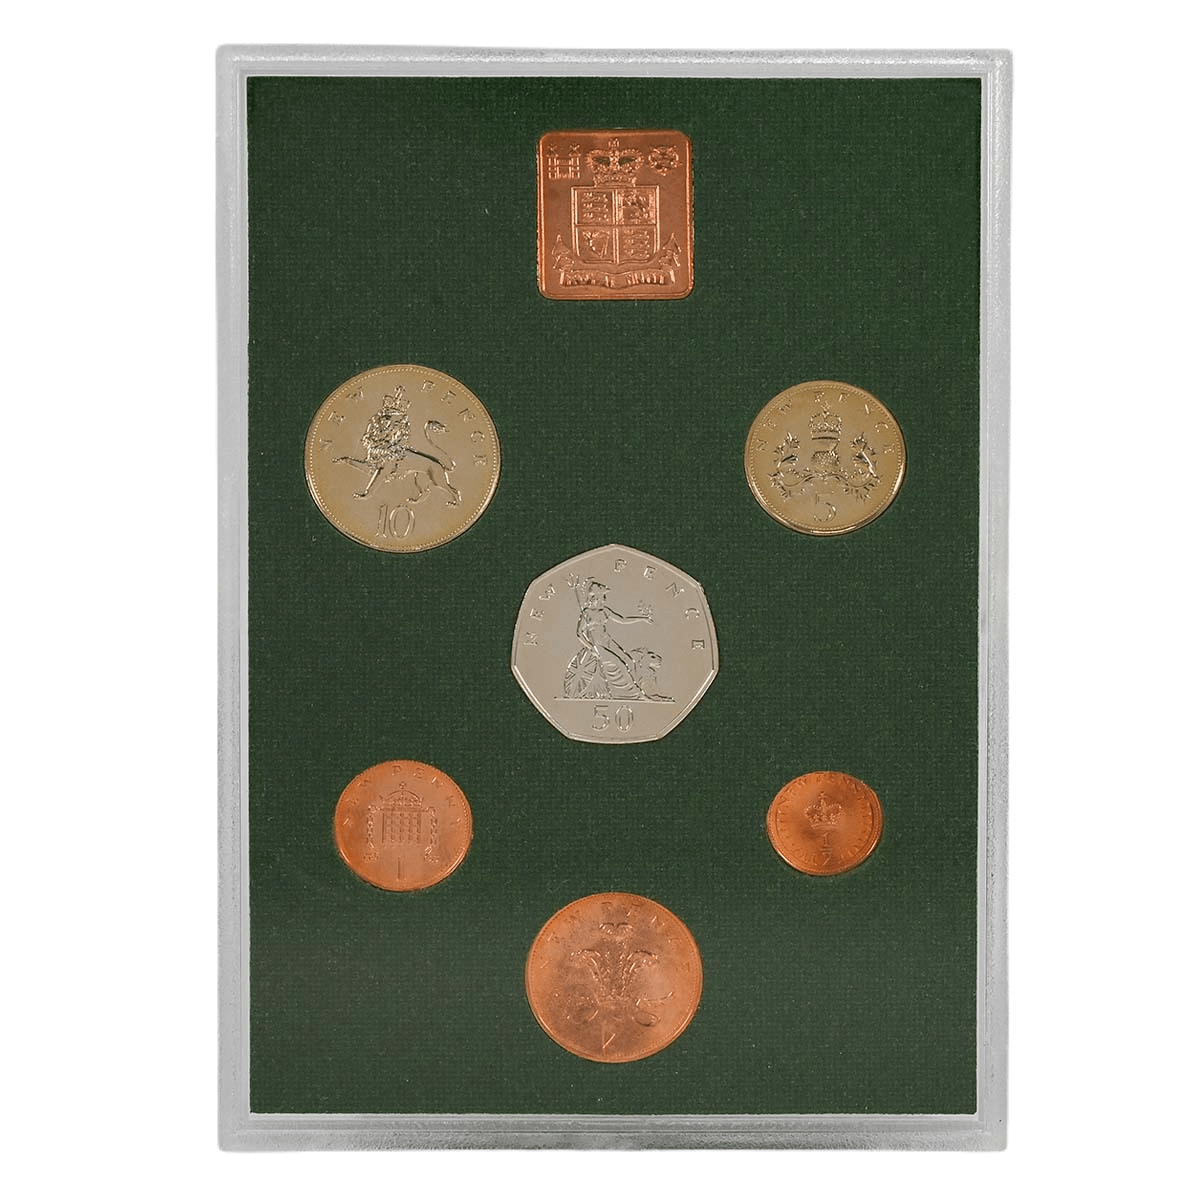 1975 UK Proof Annual 6 Coin Set - Loose Change Coins